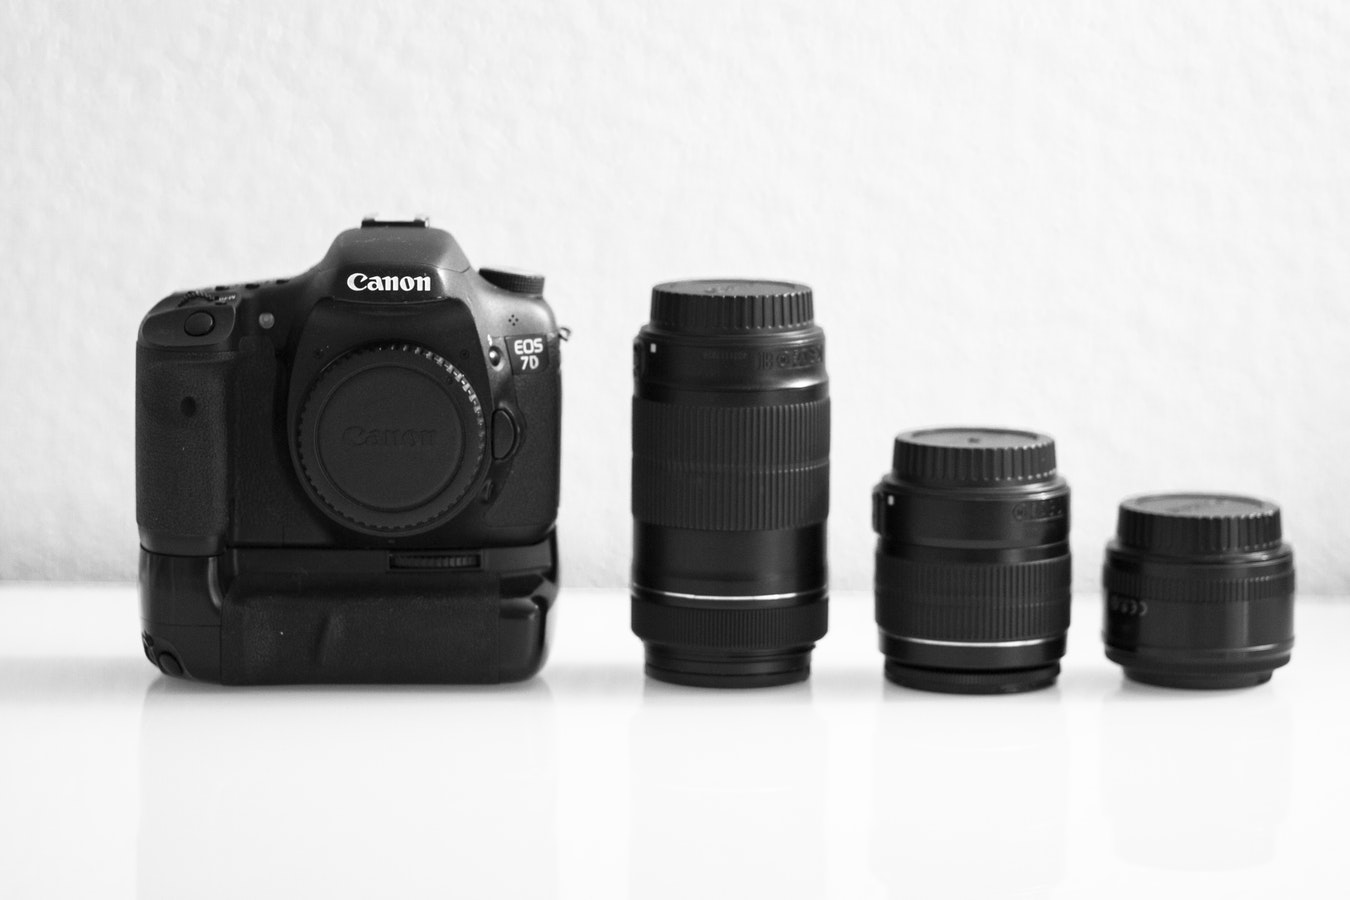 Canon EOS 7D DSLR camera with battery pack and three interchangeable lenses